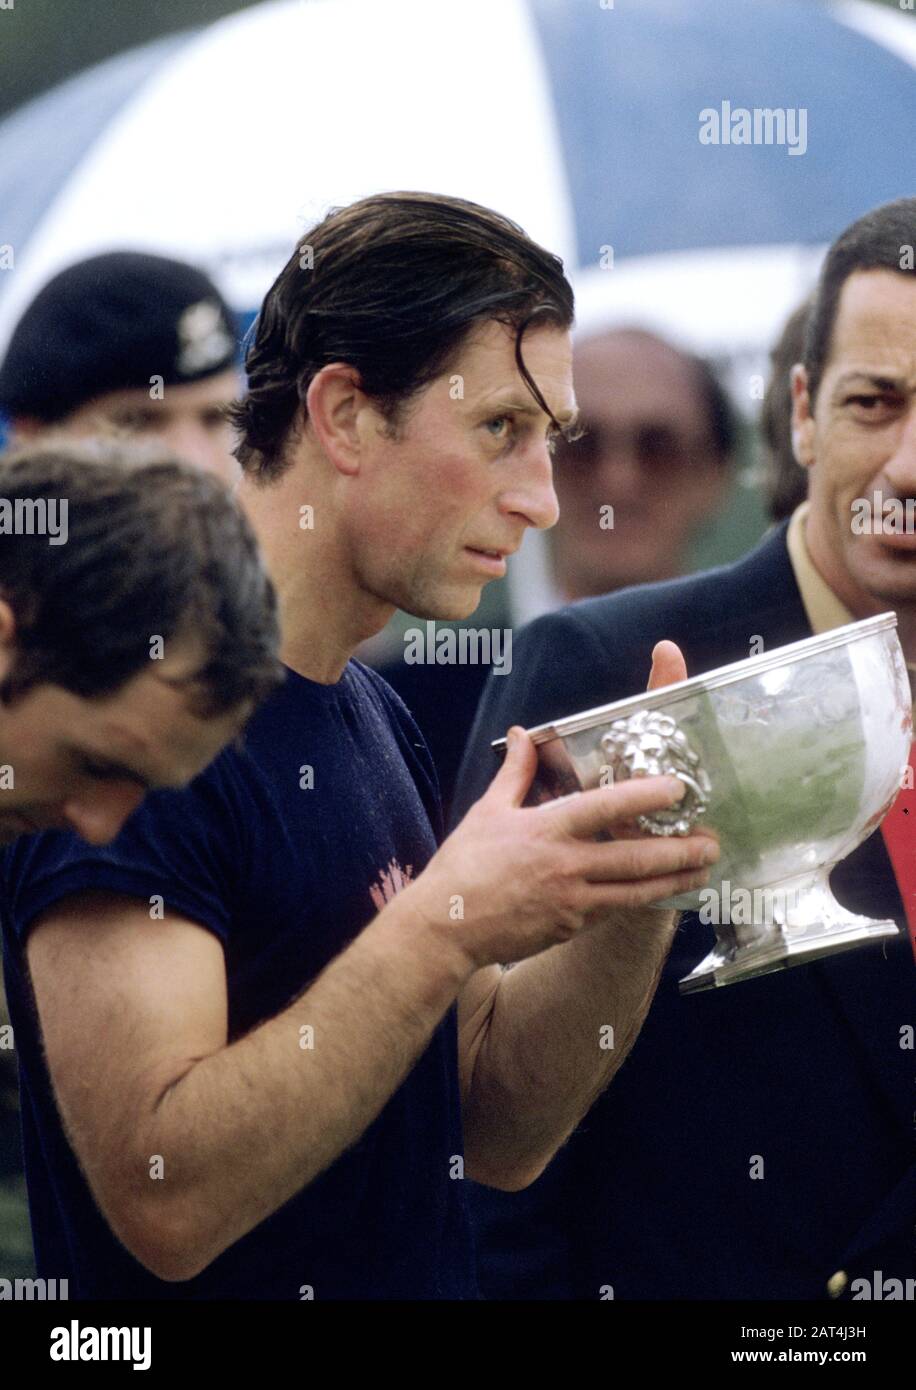 HRH Prince Charles, Prince of Wales at Tidworth Army vs Navy polo challege, Tidworth, England  July 1984 Stock Photo